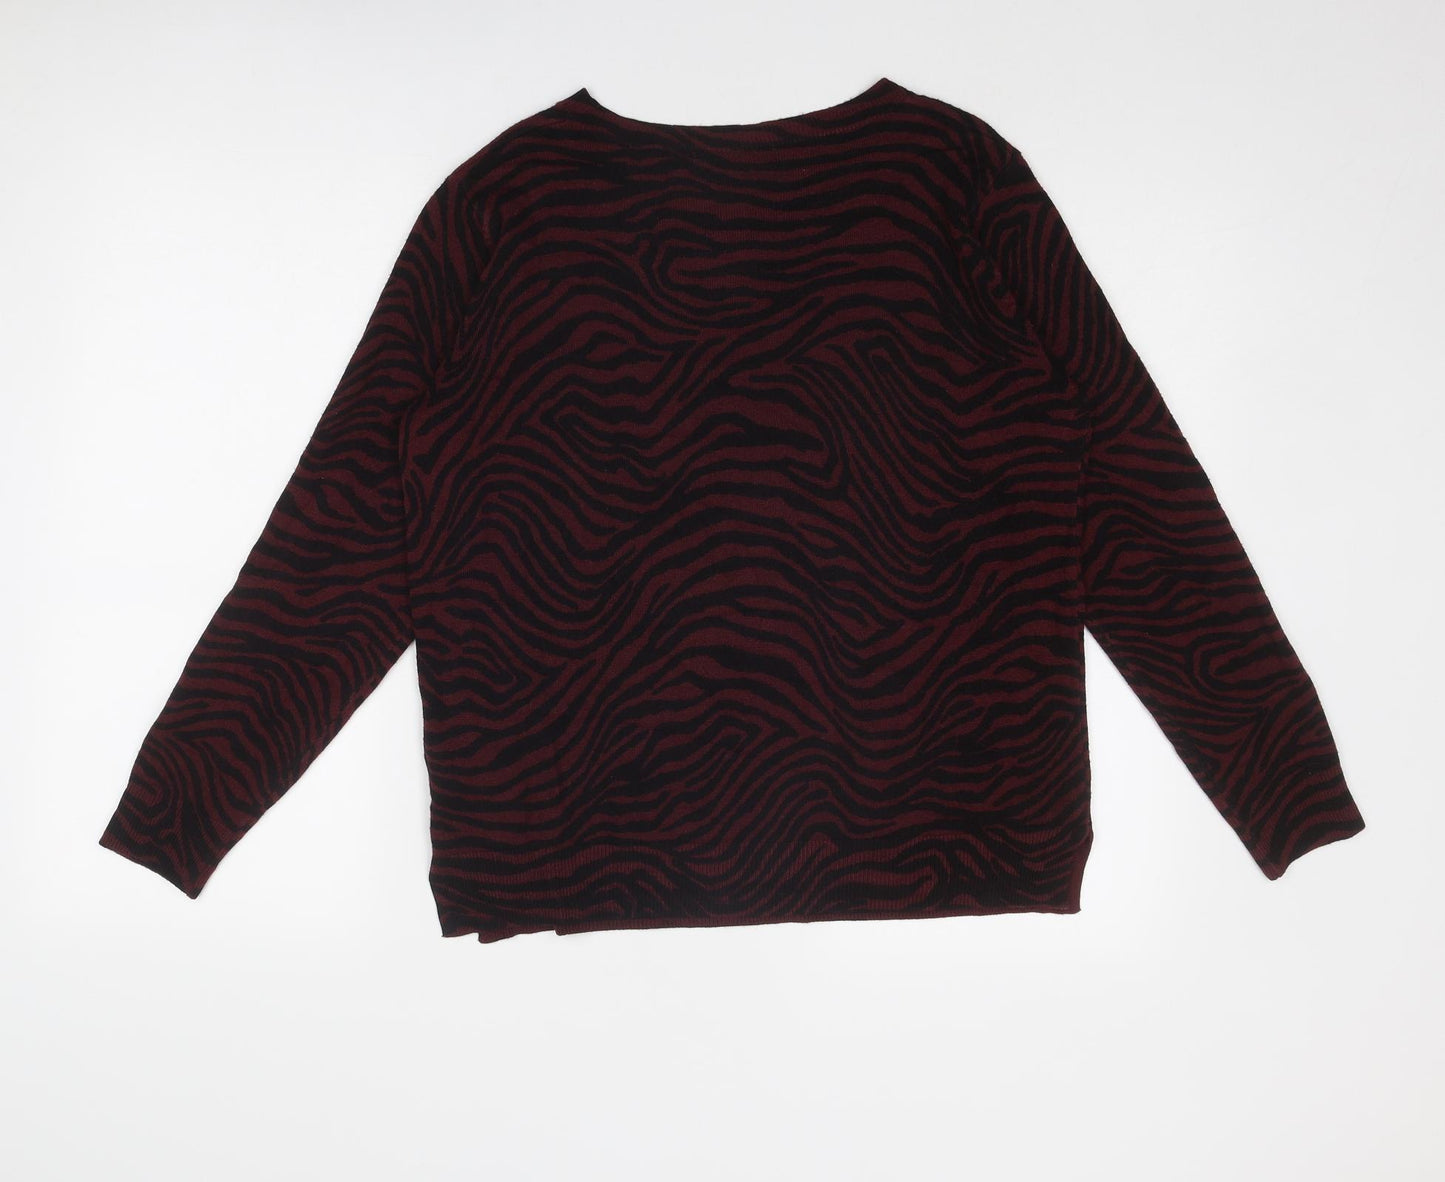 Marks and Spencer Womens Red Round Neck Animal Print Acrylic Pullover Jumper Size 16 - Tiger Pattern